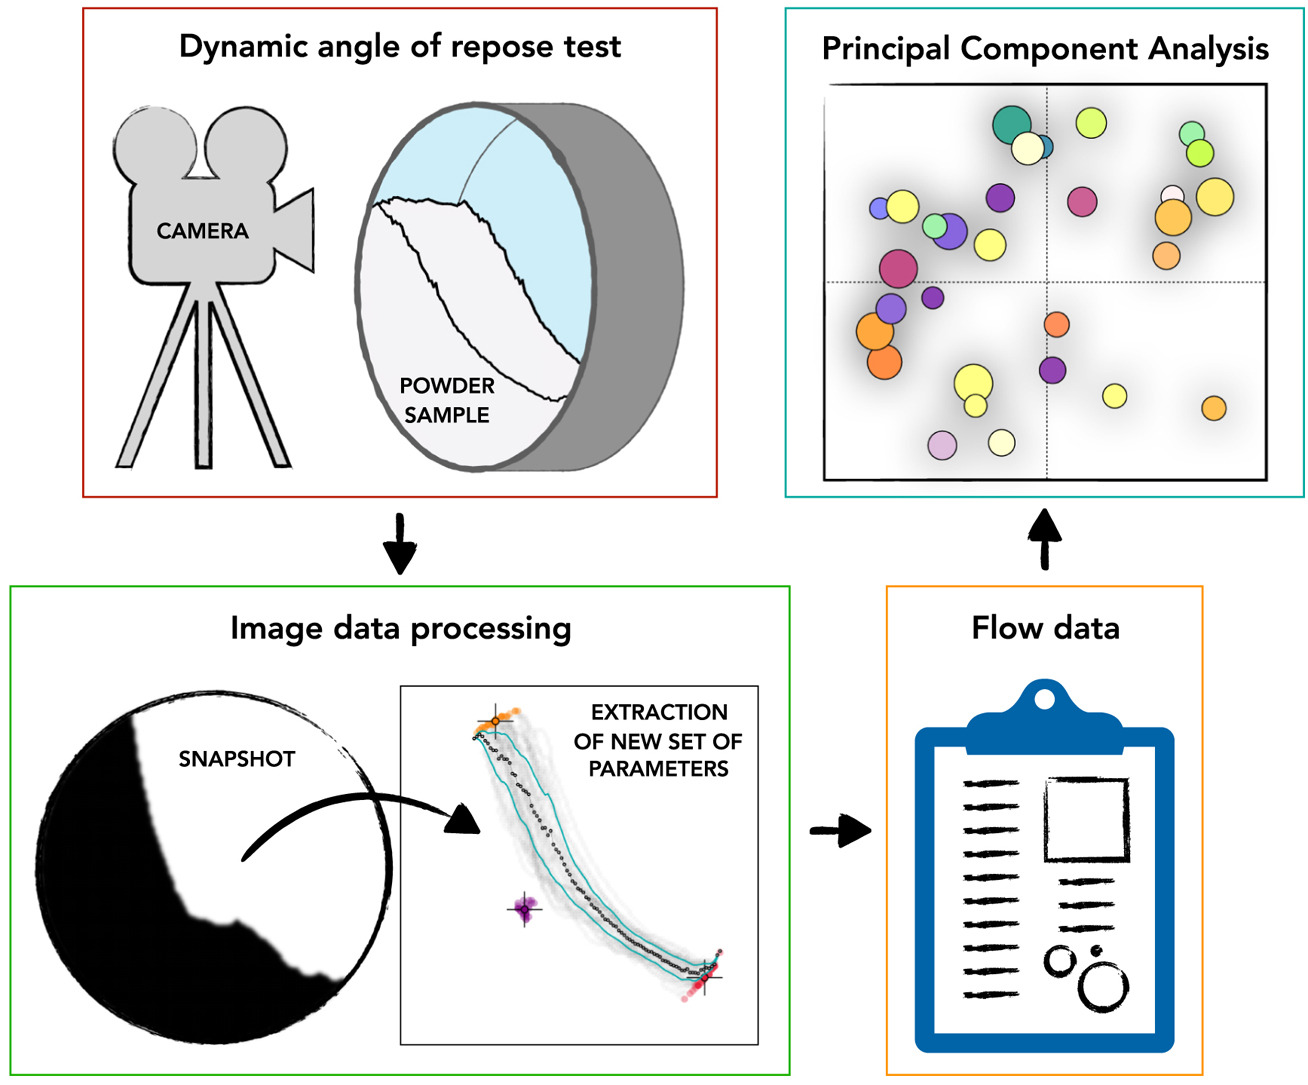 A novel methodology for data analysis of dynamic angle of repose tests and powder flow classification